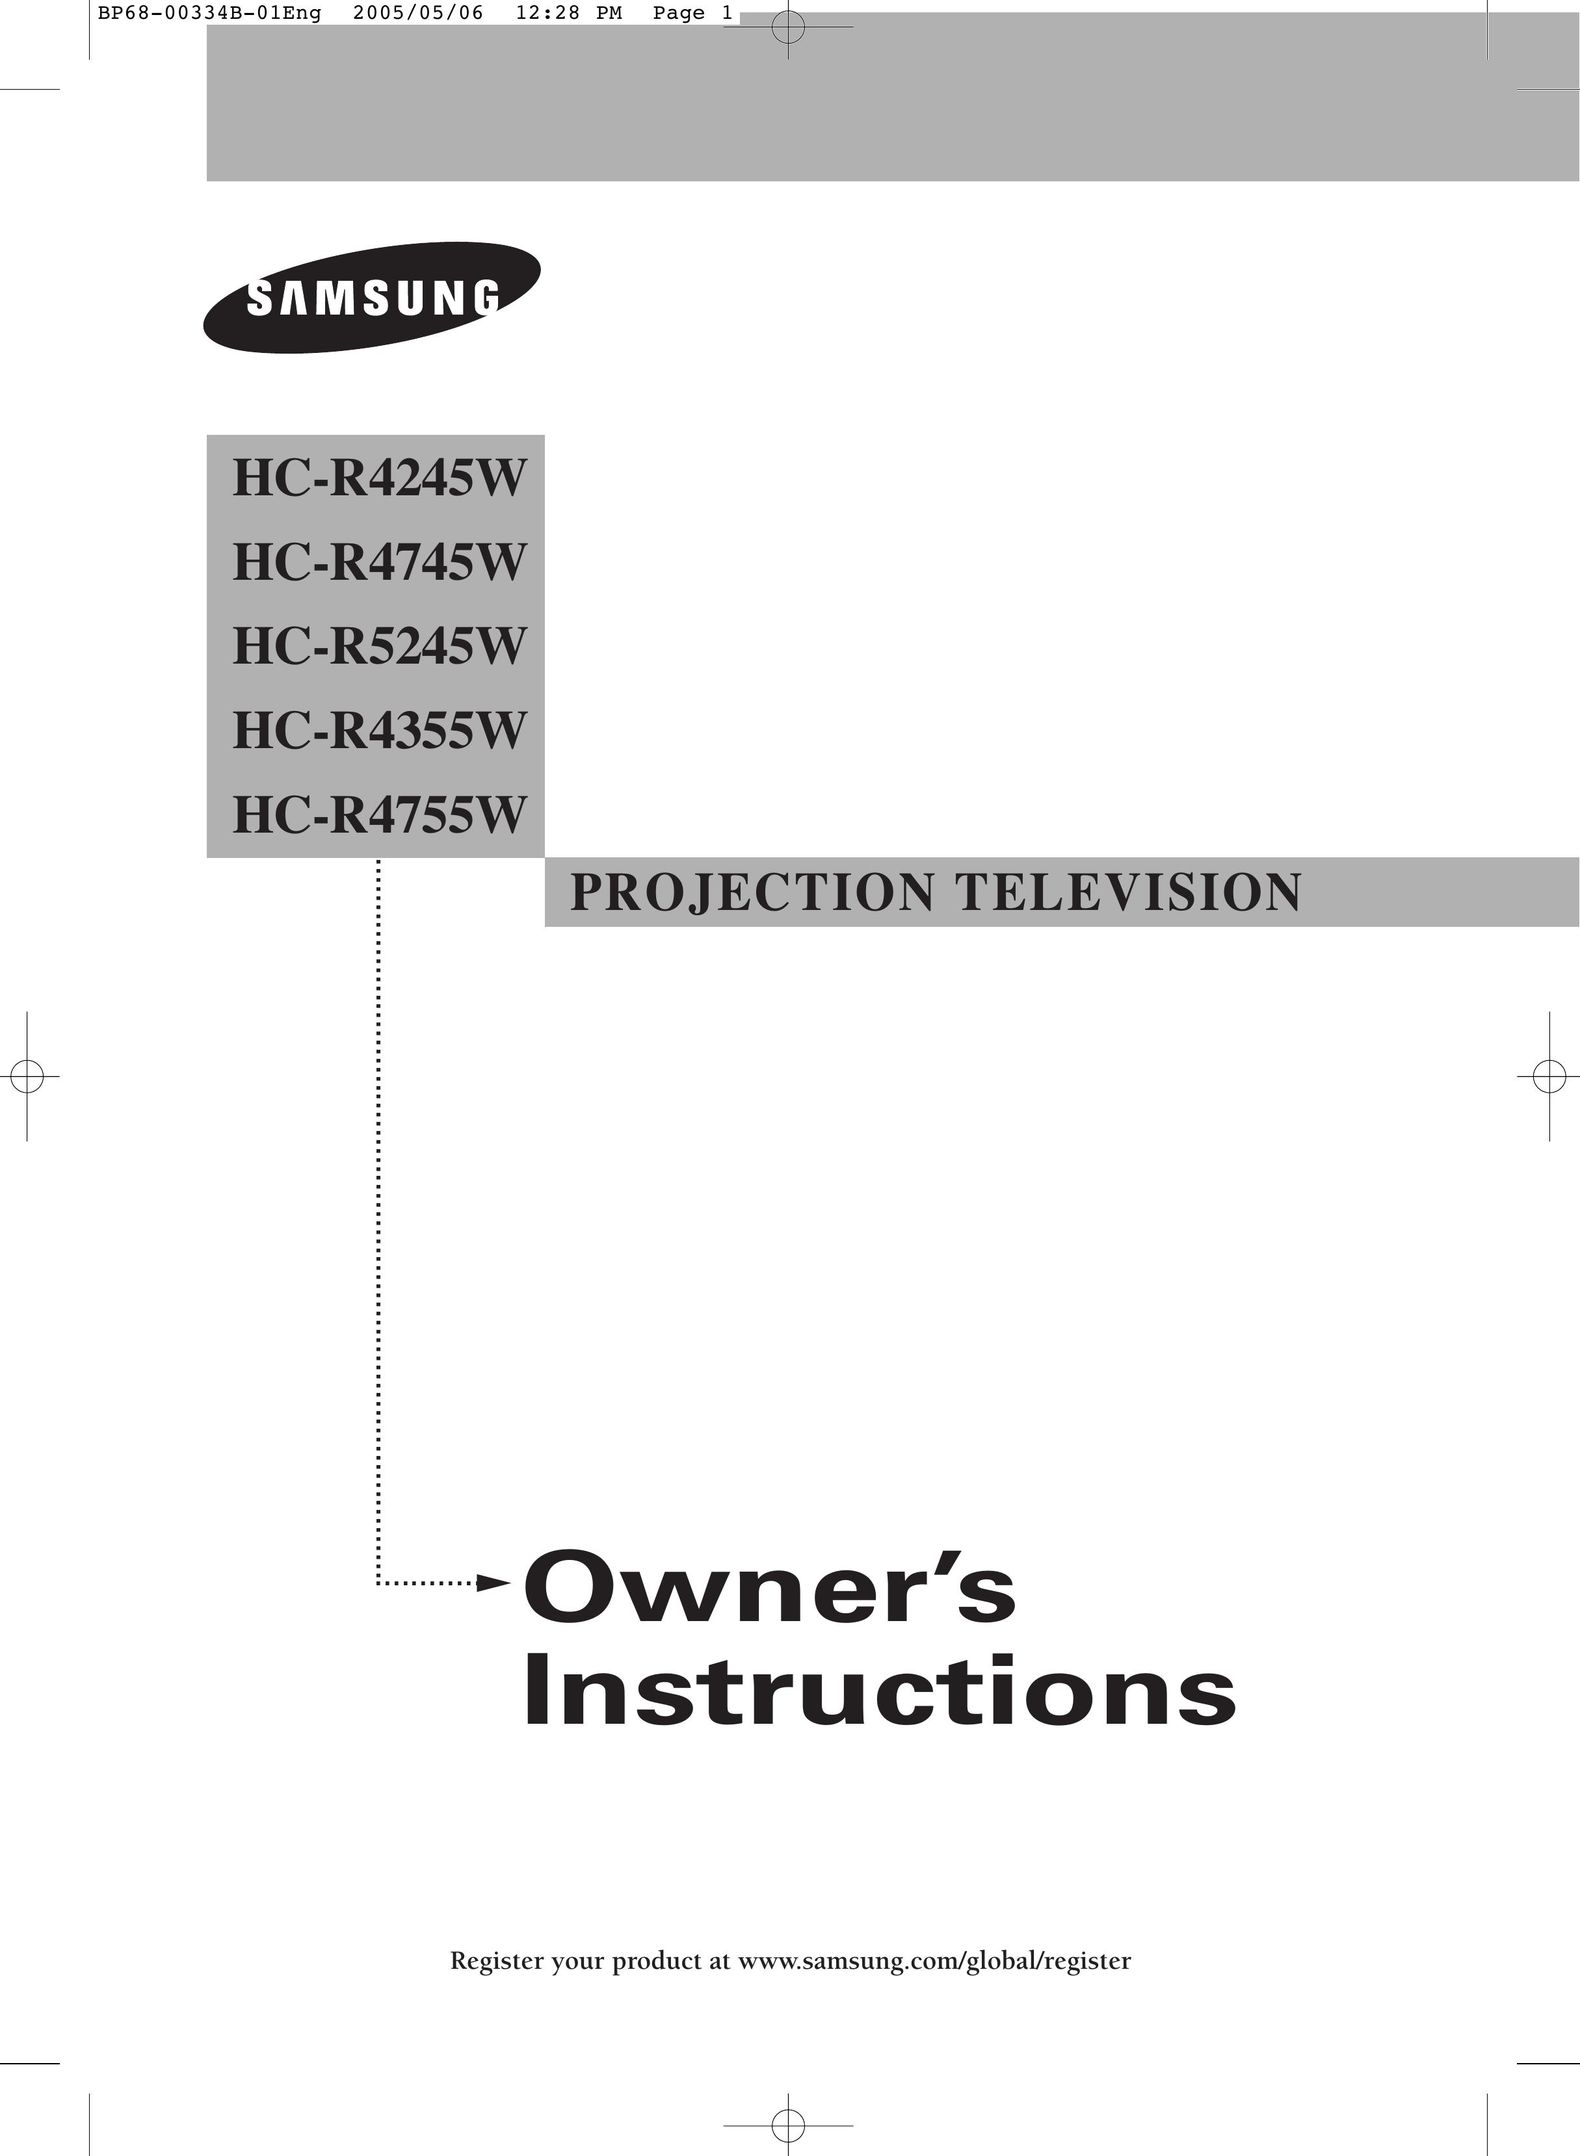 Samsung HC-R4245W Projection Television User Manual